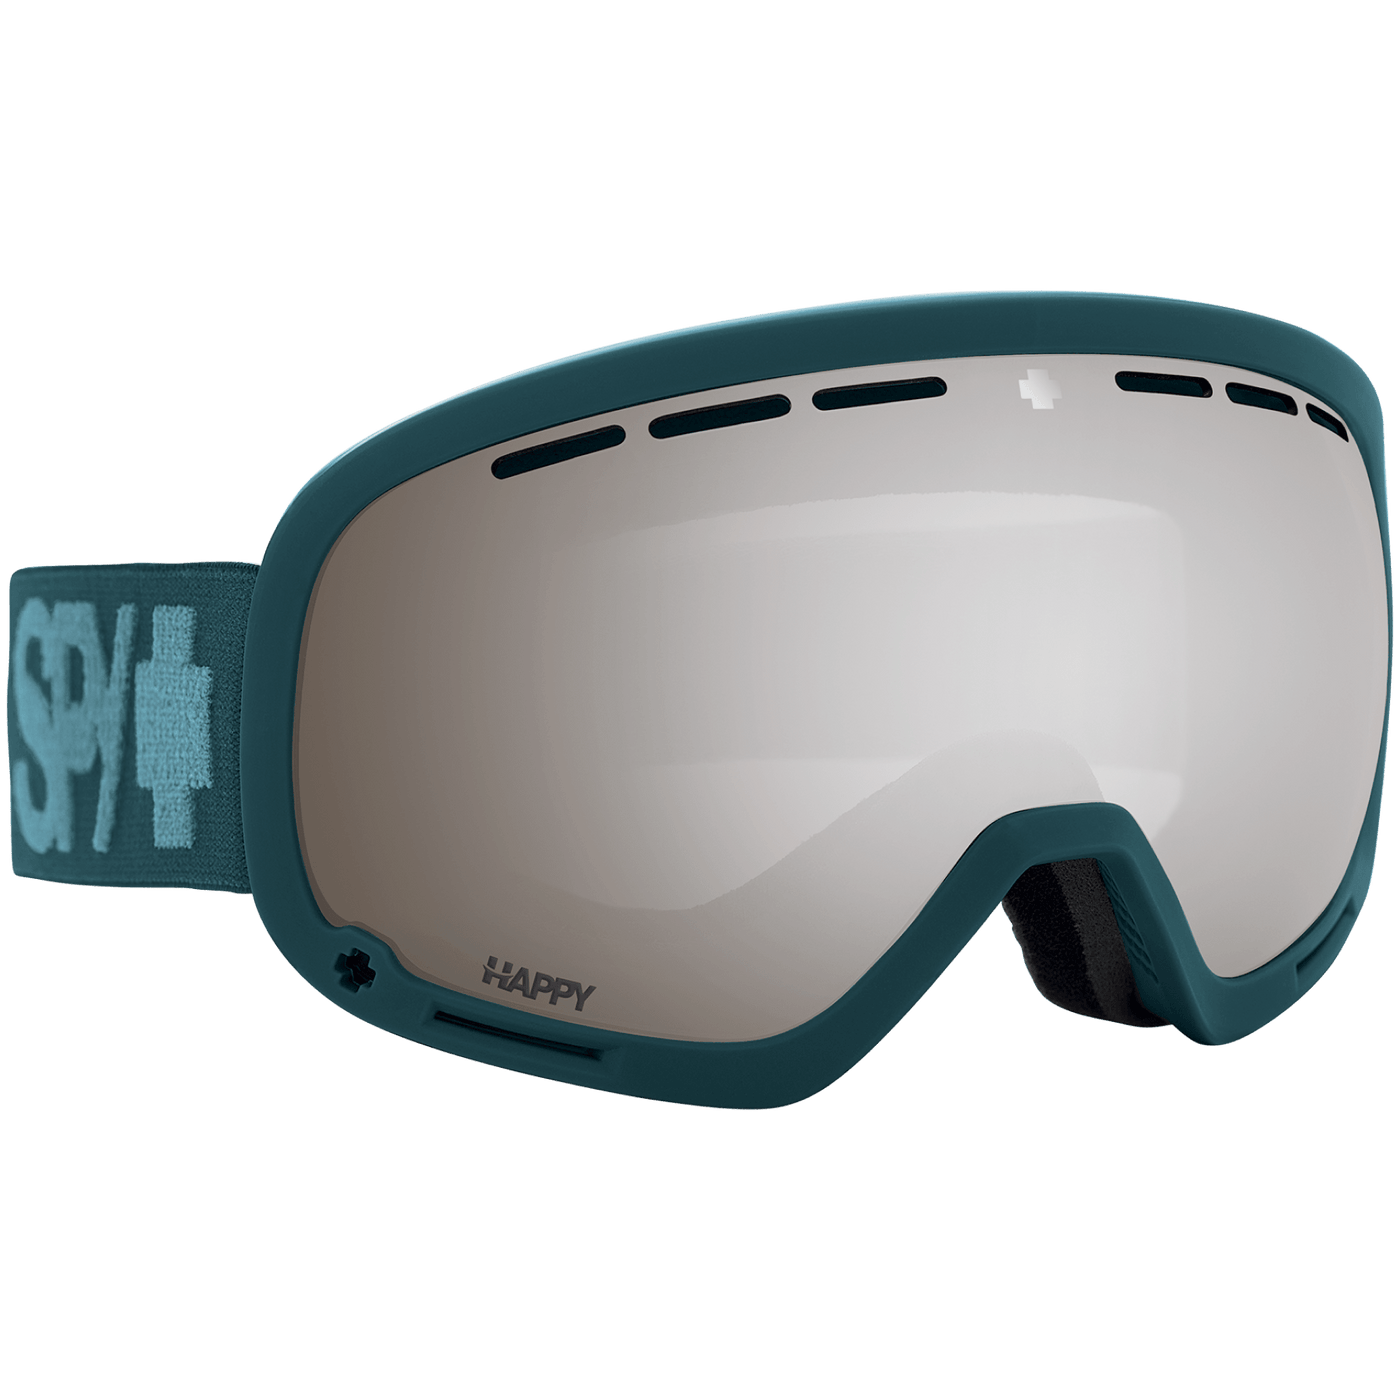 SPY Marshall Snow Goggles - Monochrome Teal with bronze spectra